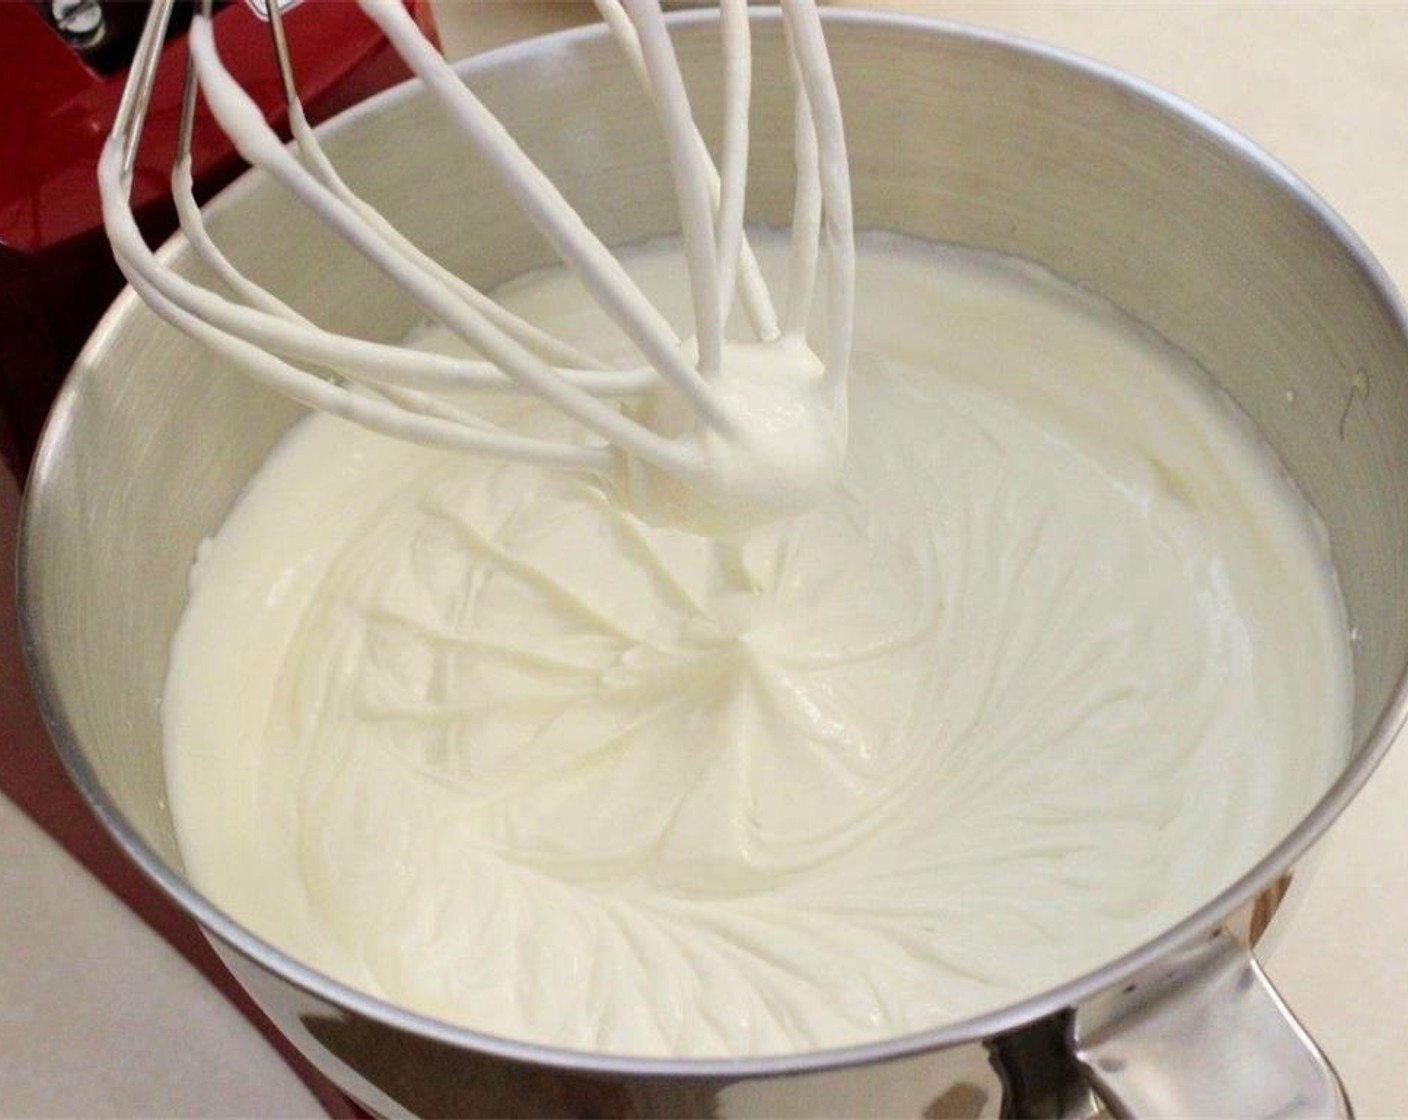 step 7 Combine the Sour Cream (1/4 cup), La Lechera® Sweetened Condensed Milk (1 can), Powdered Confectioners Sugar (1/2 cup), and Vanilla Extract (1/2 Tbsp) in a standing mixer using the whisk attachment. Add the heavy Heavy Cream (1 cup) and continue whisking until frosting thickens.